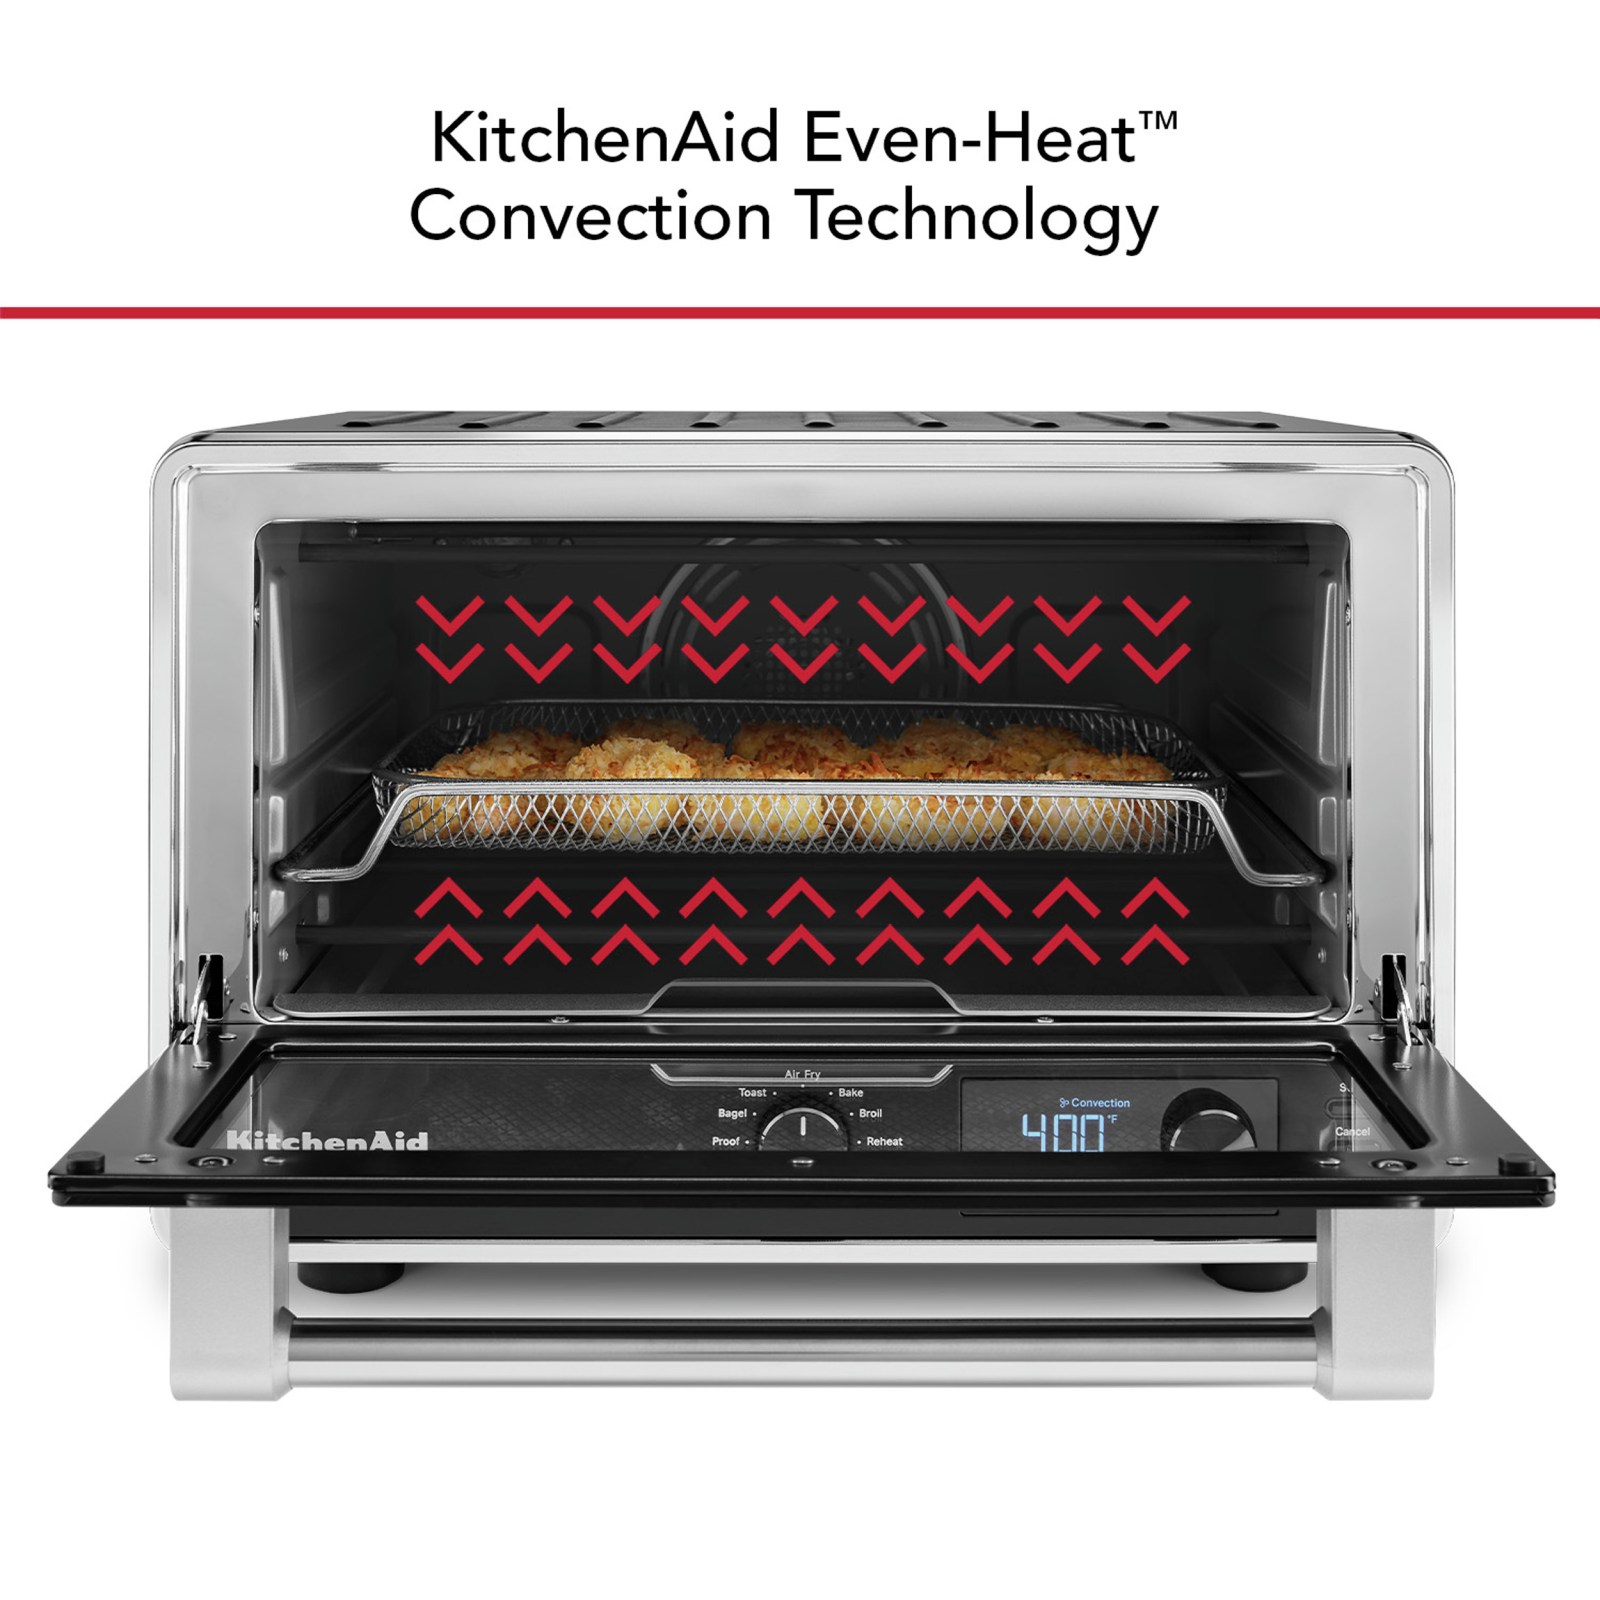 KitchenAid - Digital Countertop Oven with Air Fry in Black - KCO124BM